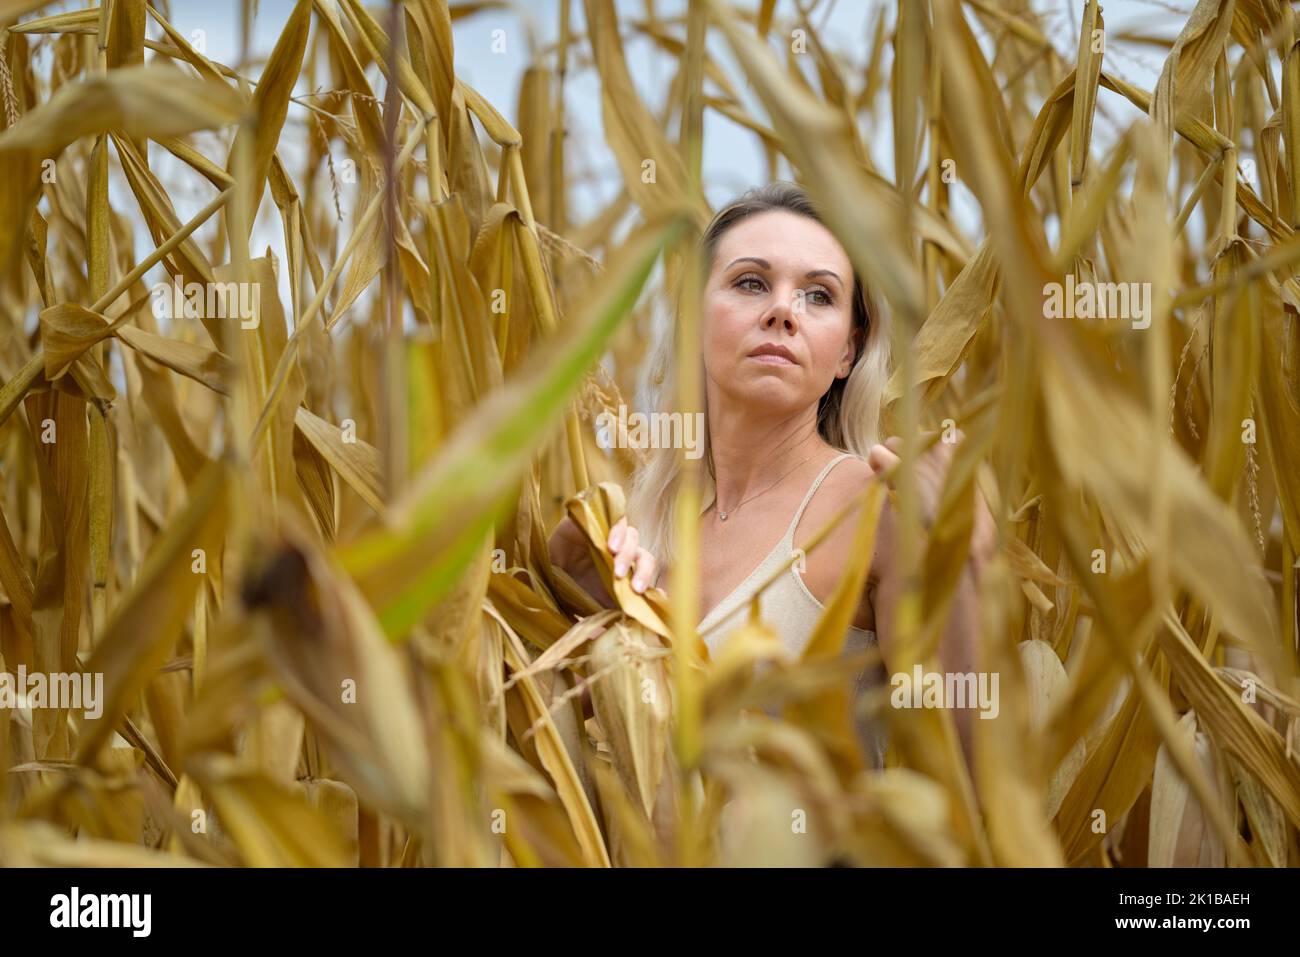 Attractive blond woman wearing a gold dress is standing in the middle of a corn field looking aside depp in thought Stock Photo